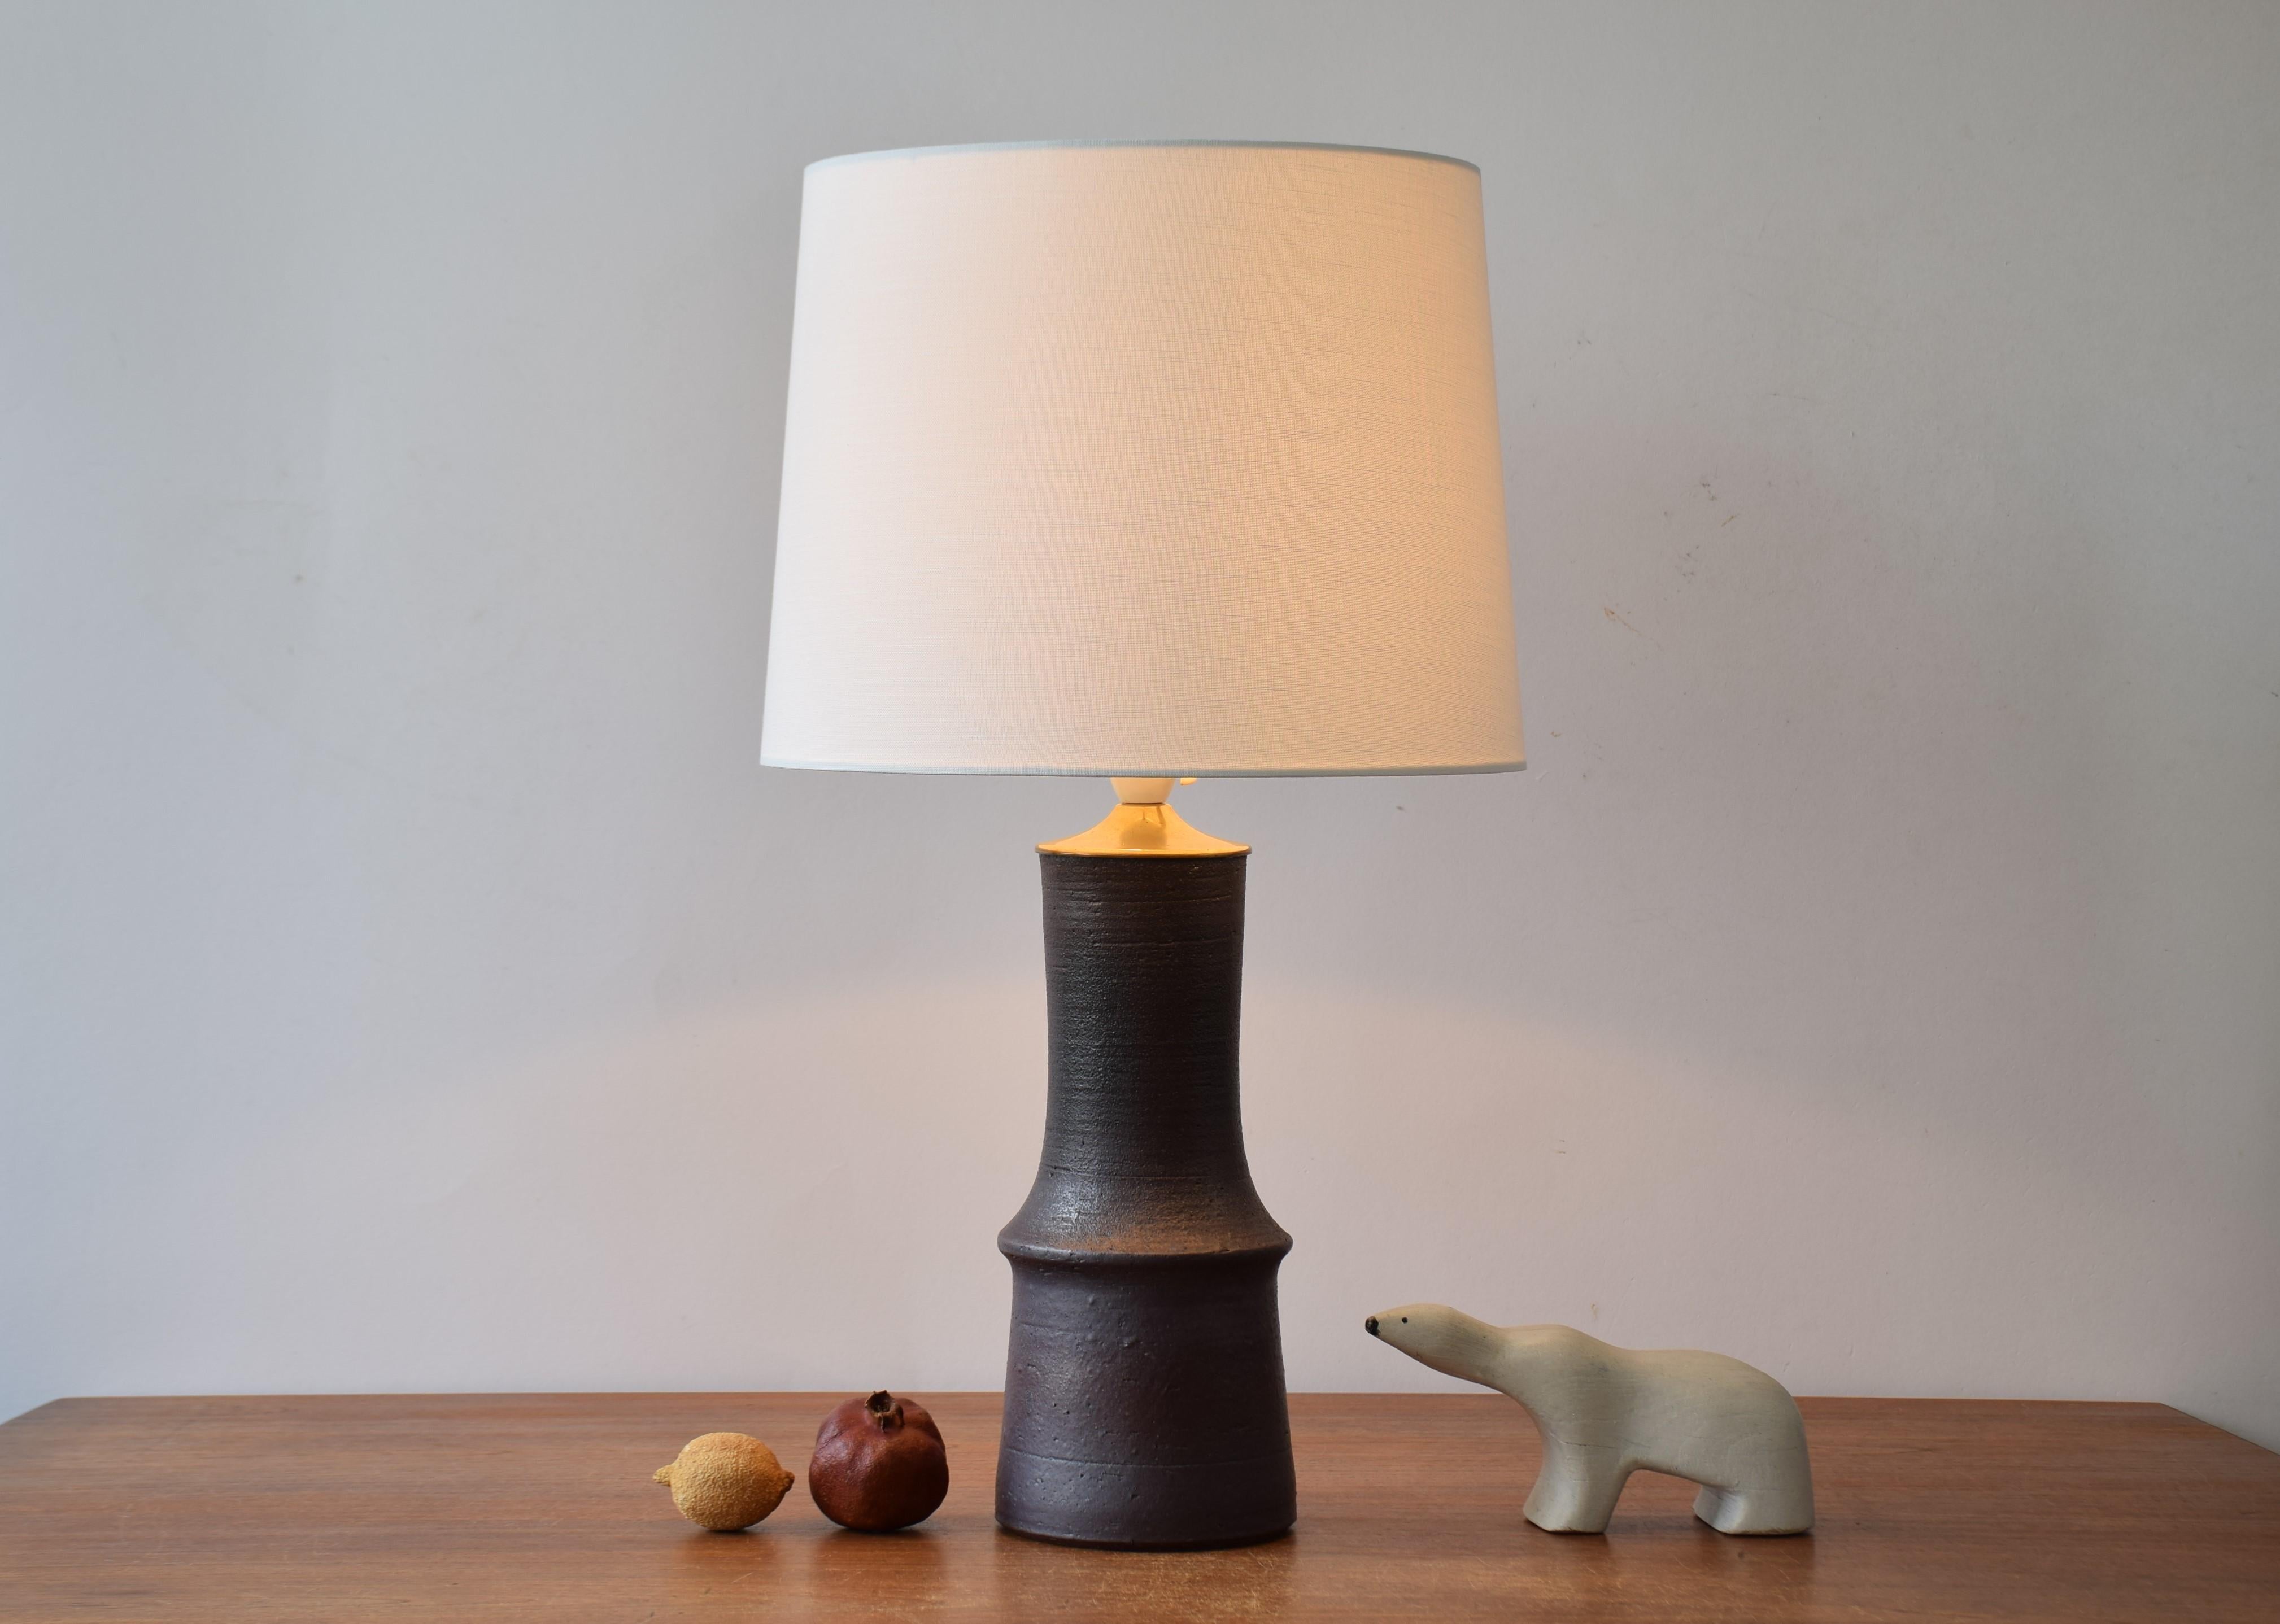 Tall ceramic table lamp by Liisa Hallamaa (1925-2008) for Arabia Finland. Made ca 1960s to 70s.

The lamp has an earthy brown glaze with a rustic surface and a patinated brass top. 

It´s handmarked on bottom LH (for Liisa Hallamaa)